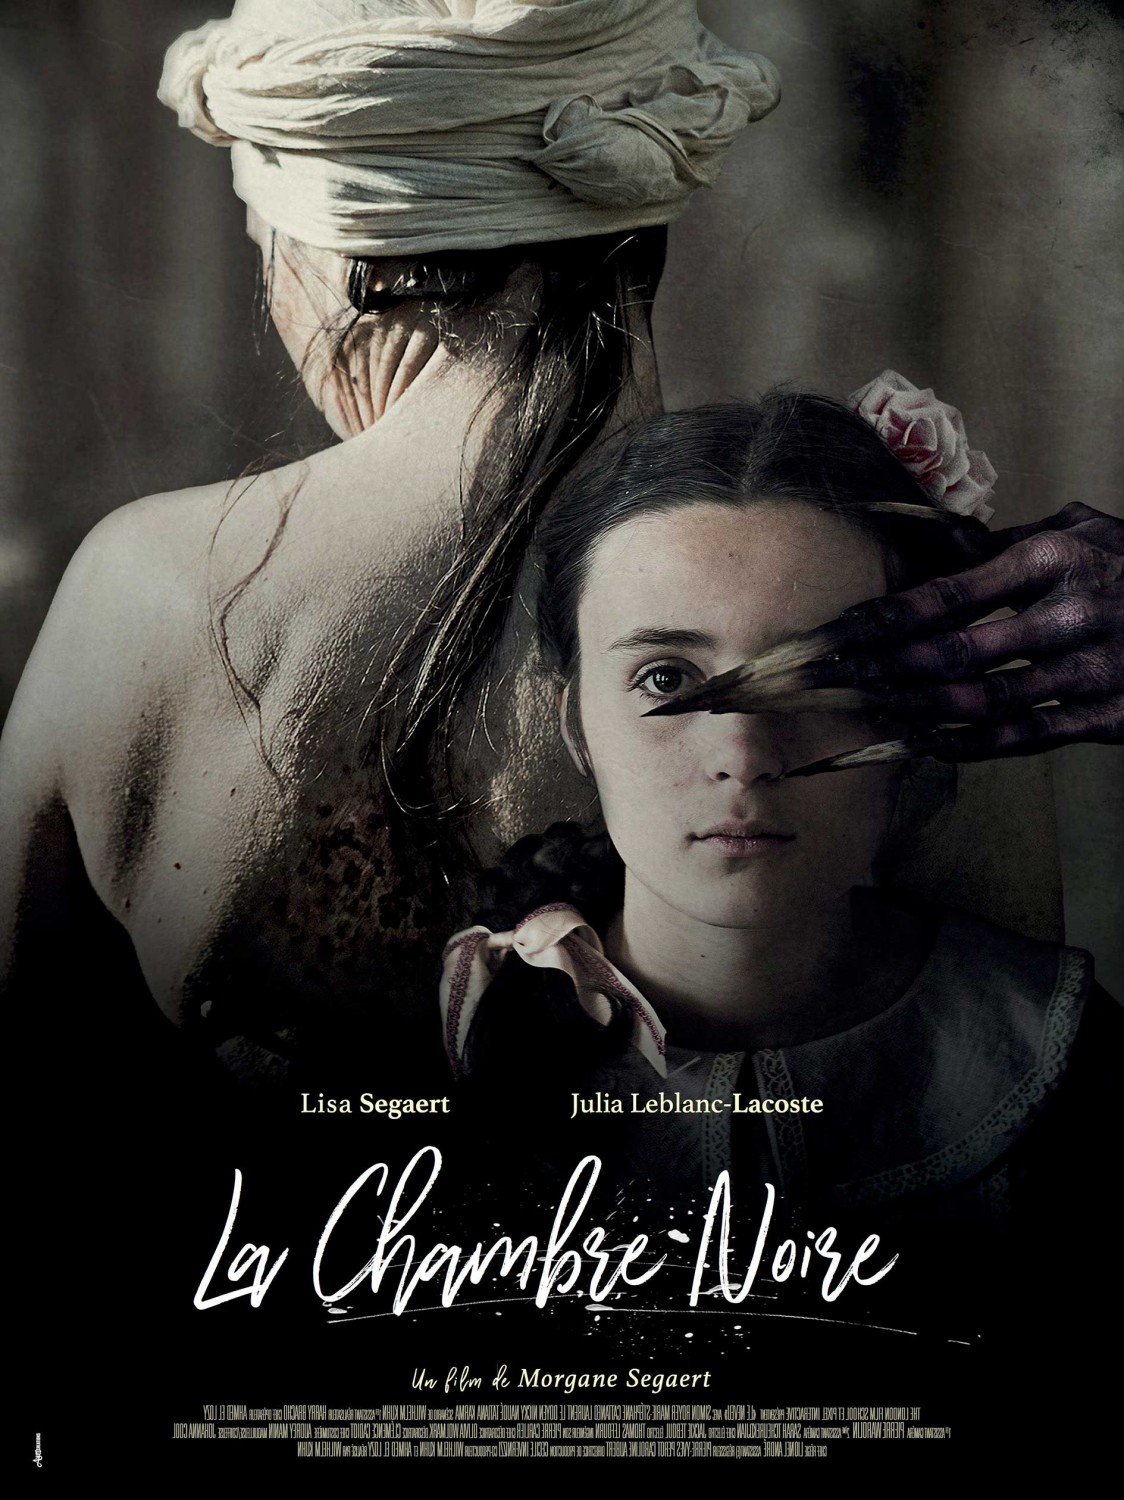 Extra Large Movie Poster Image for La Chambre noire